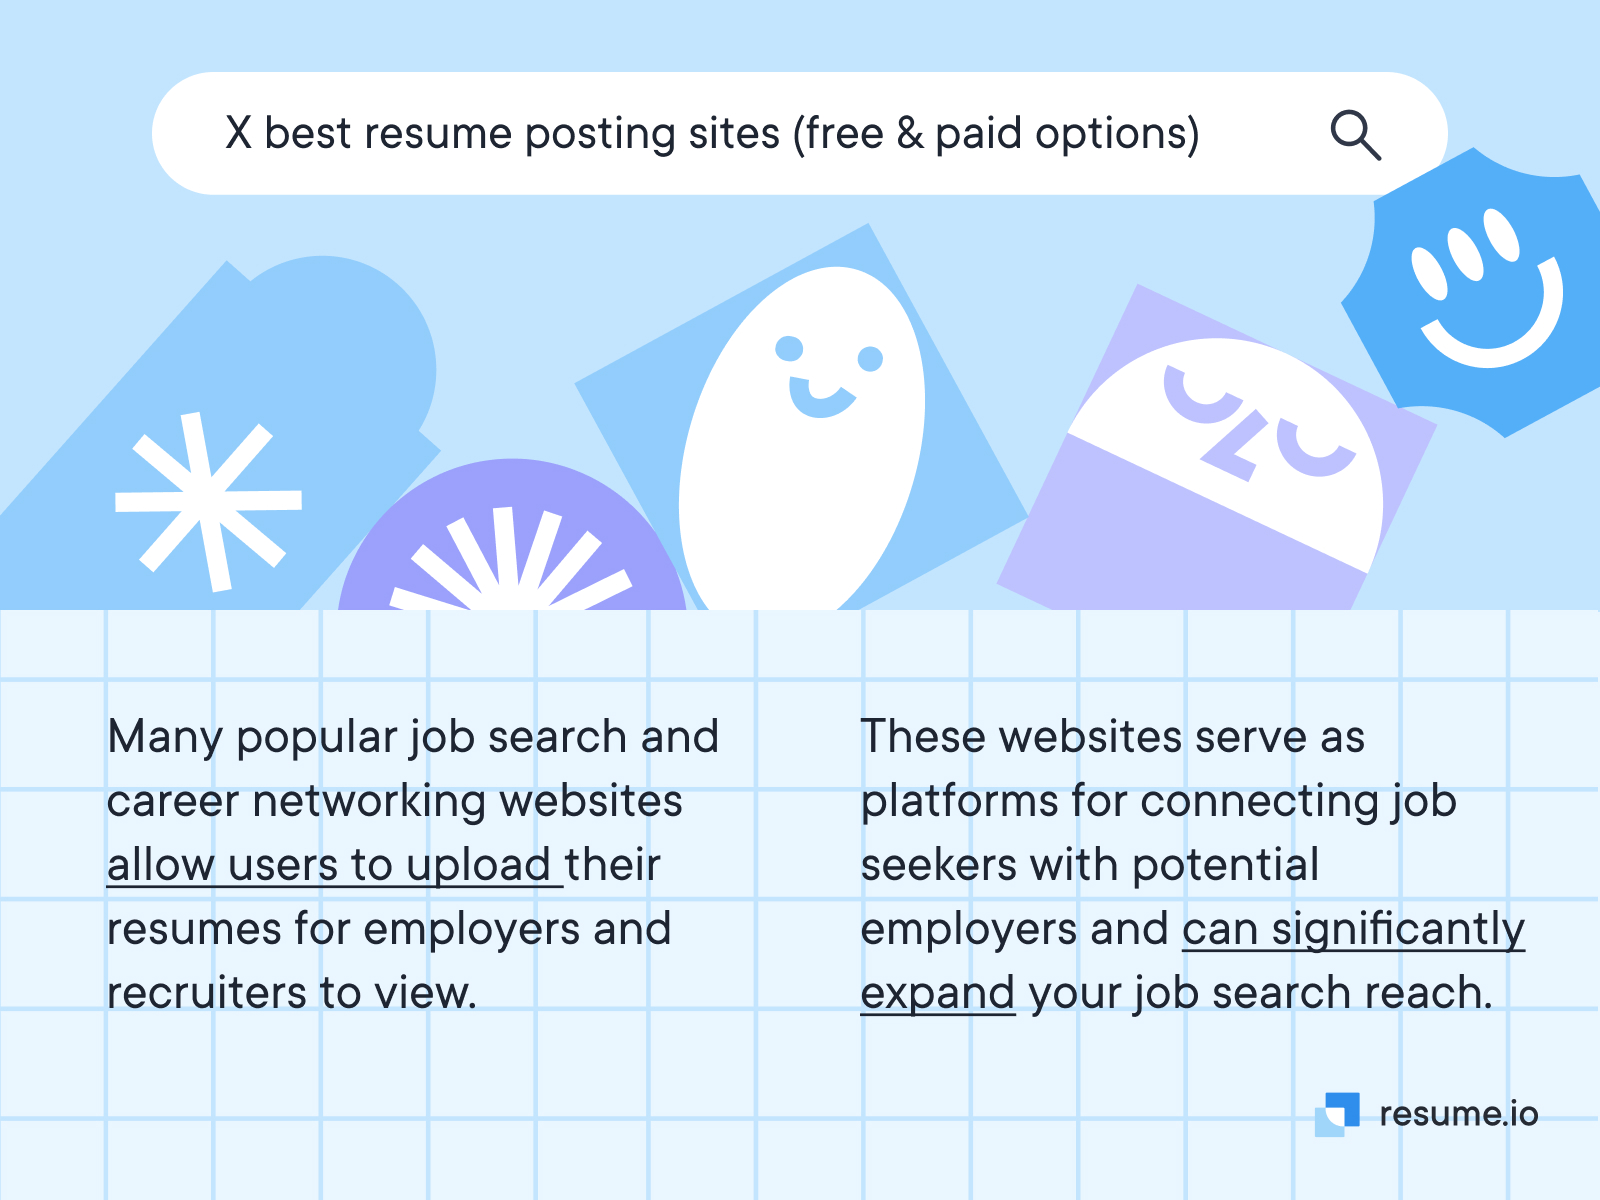 Uploading your resume for employers and recruiters can significantly expand your job search reah